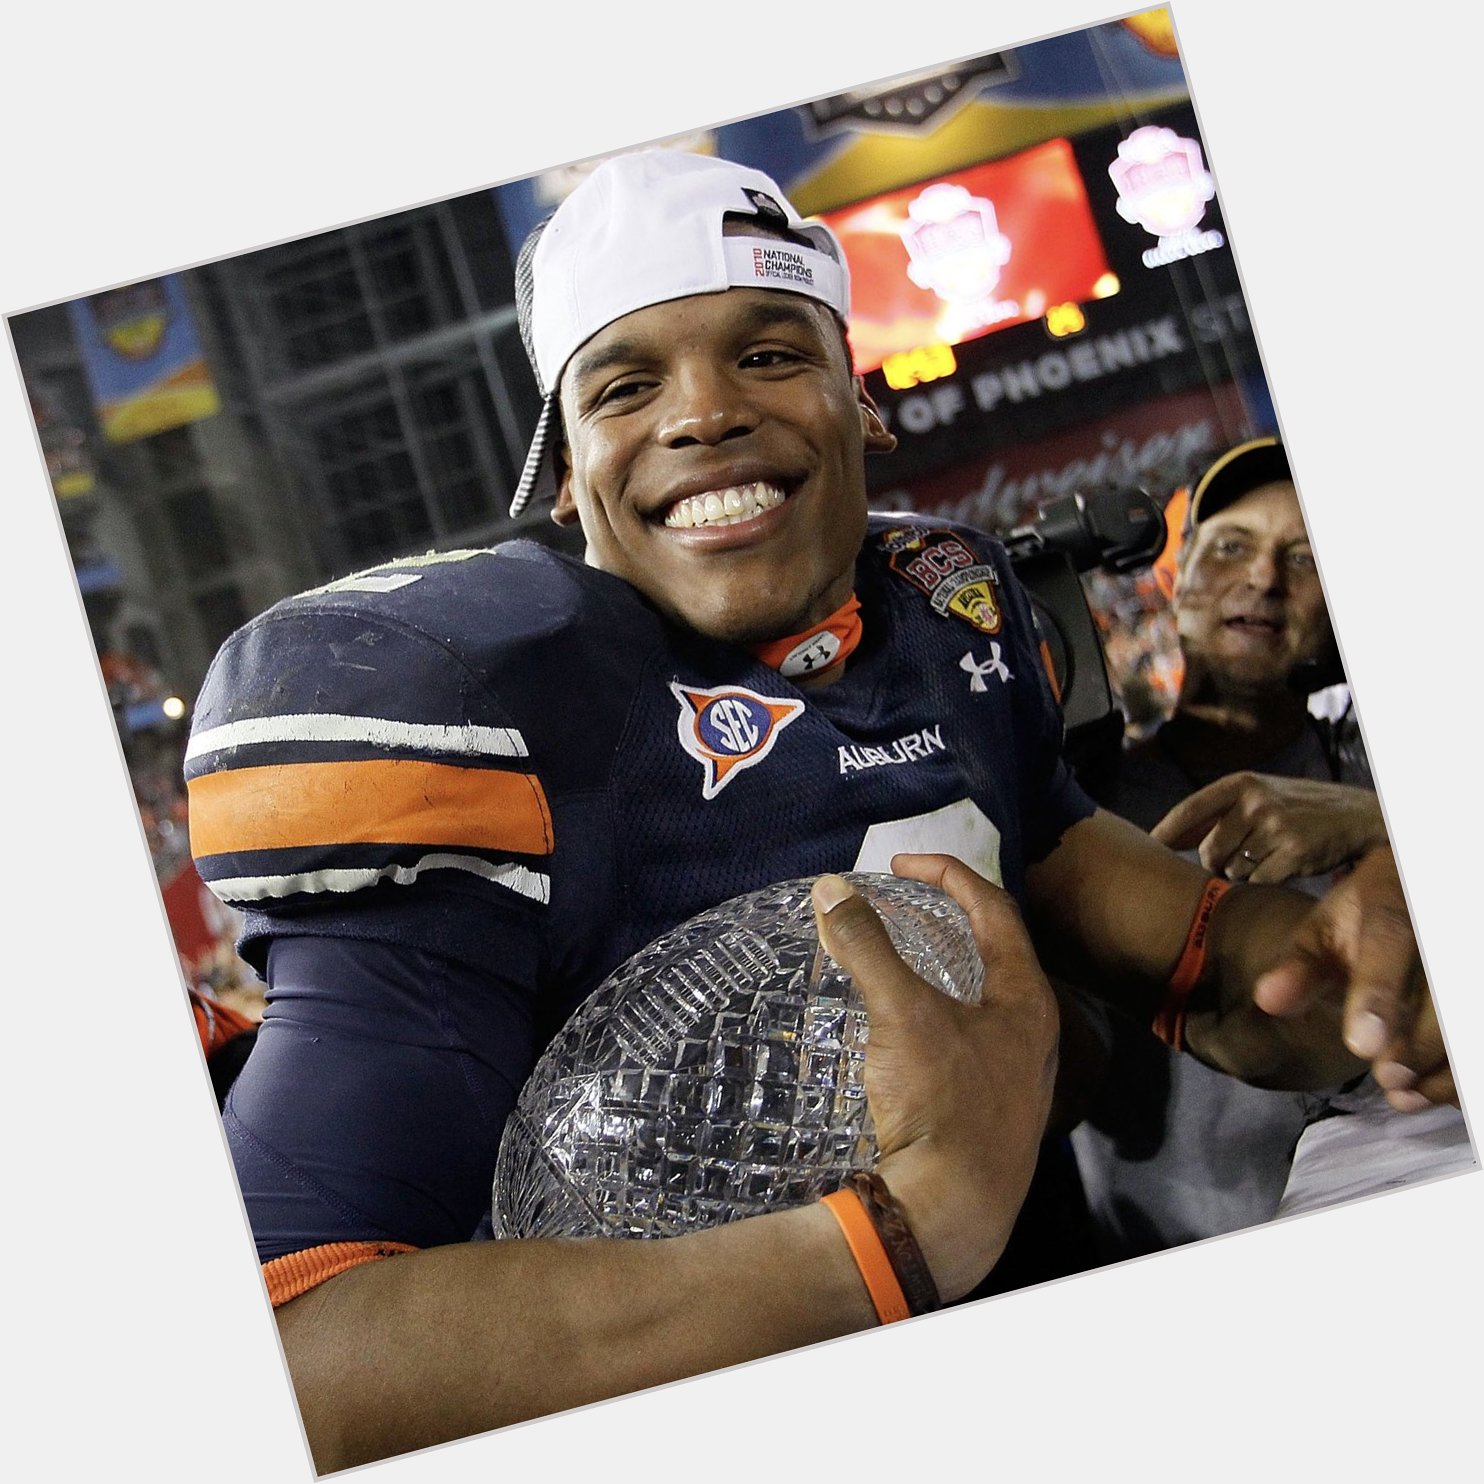 Happy birthday to the greatest college QB of all time -- cam newton 